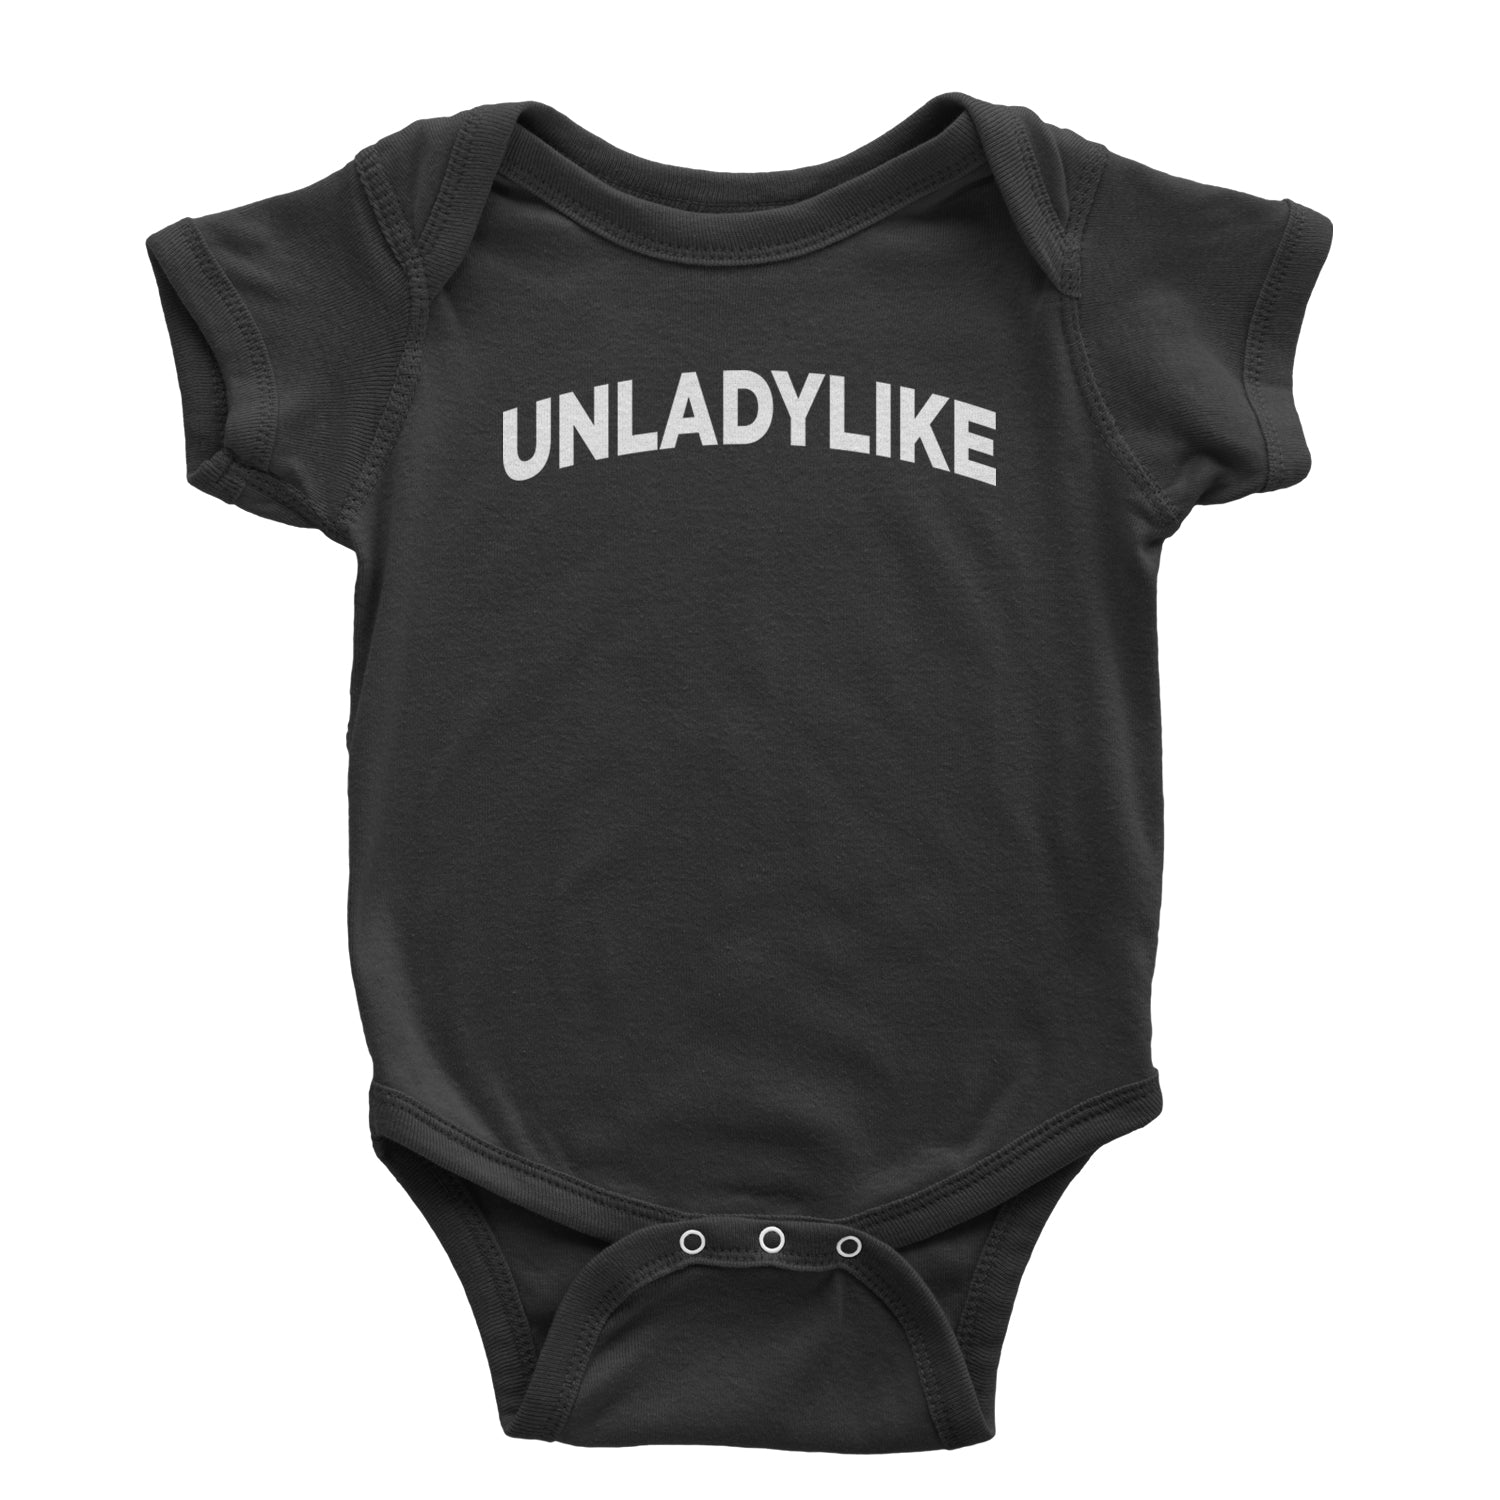 Unladylike Embrace Your Unique Strength Infant One-Piece Romper Bodysuit and Toddler T-shirt